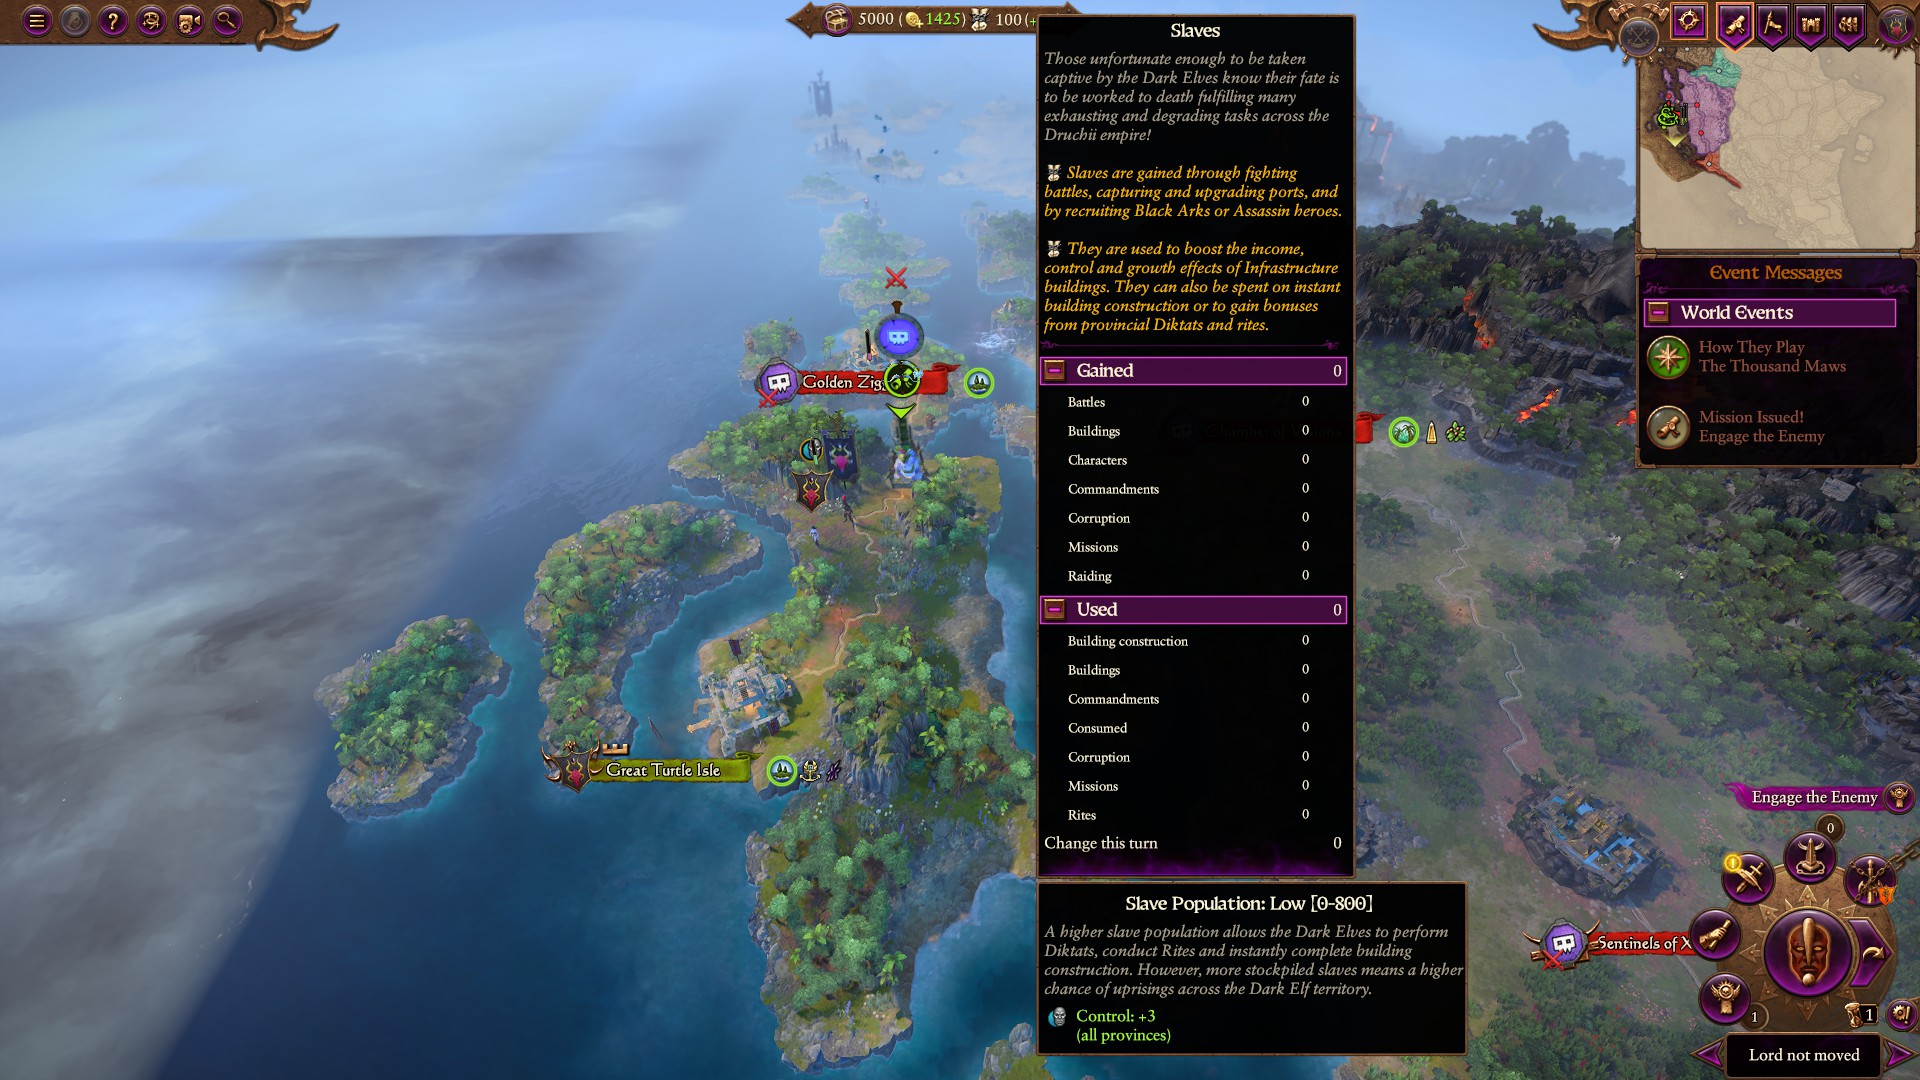 Total War: Warhammer 3 Immortal Empires Rakarth - Dark Elves campaign overview, guide and second thoughts image 3